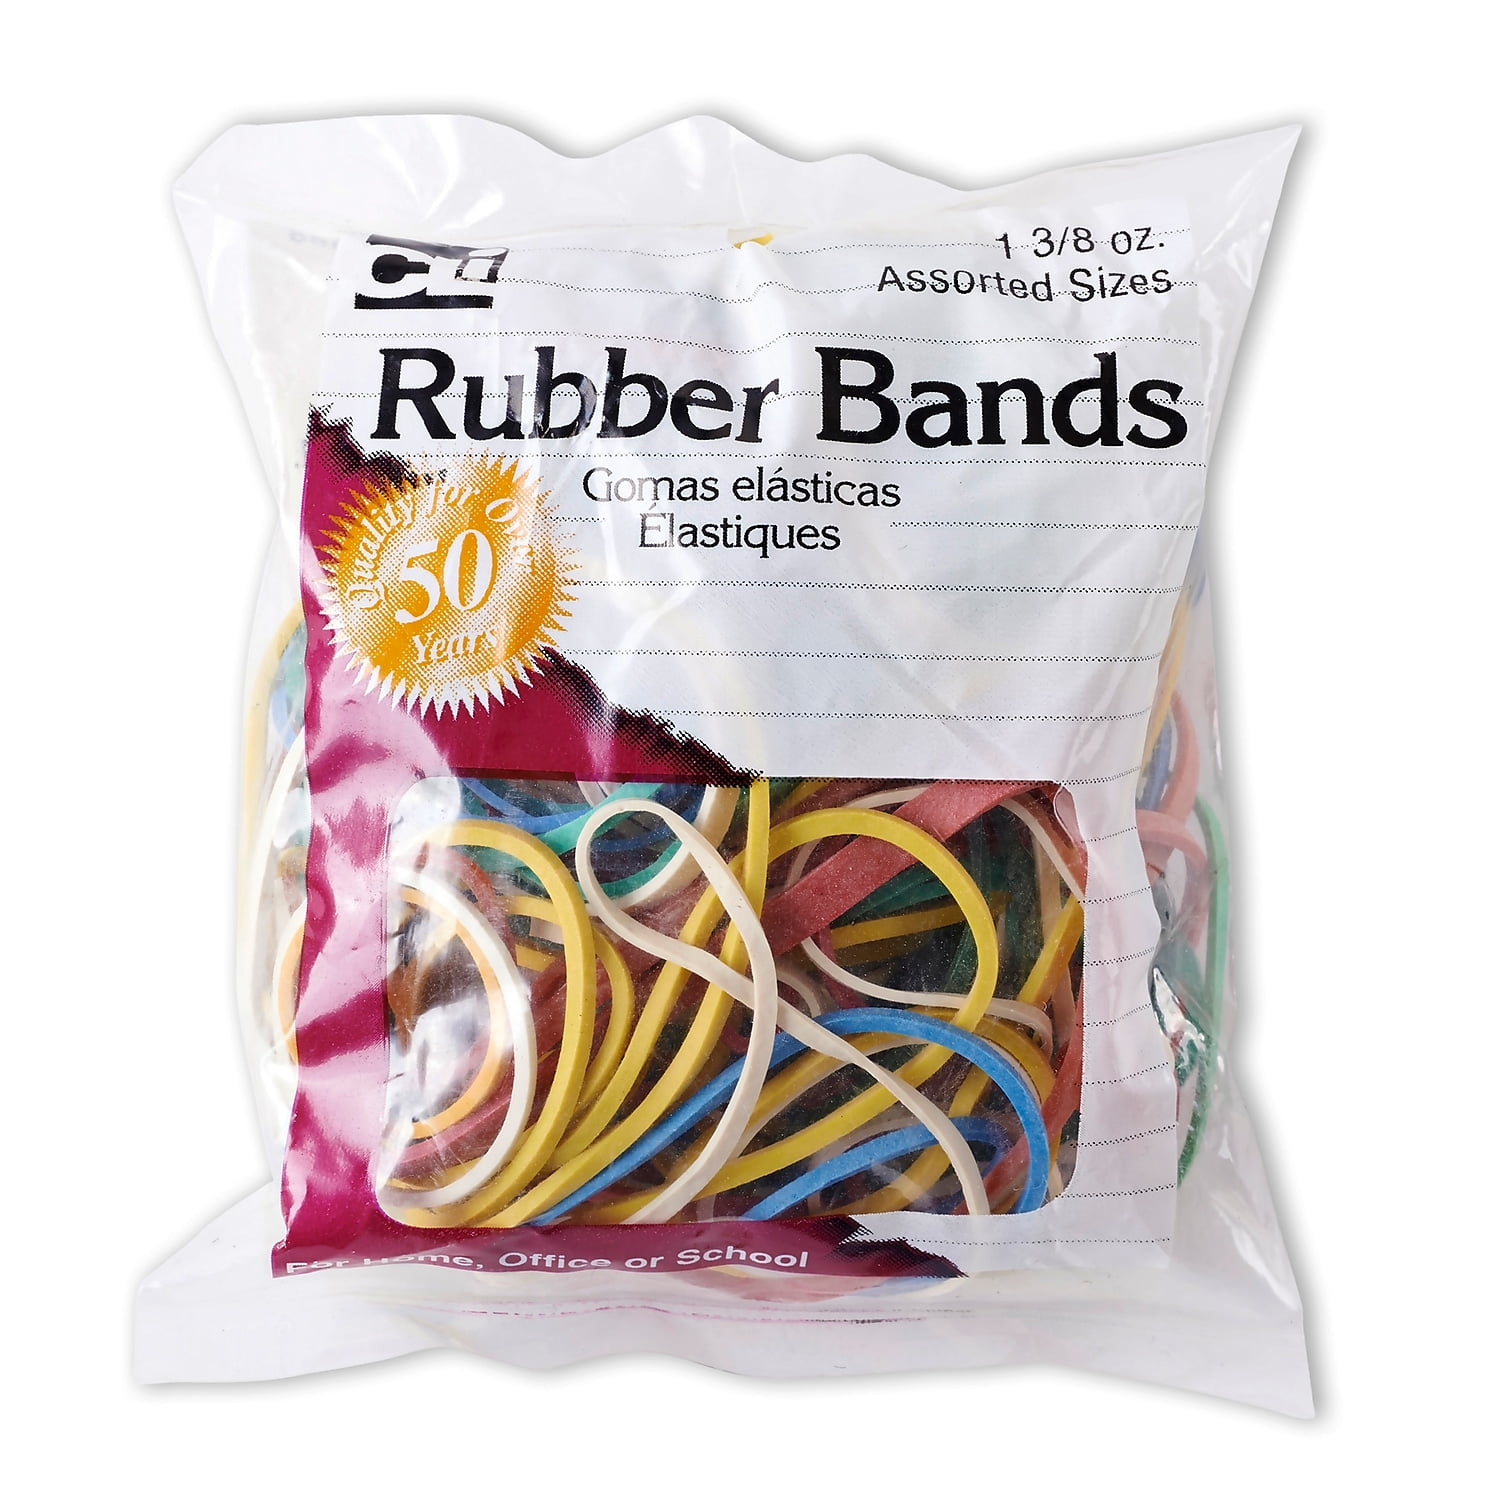 Colorful Rubber Bands - Size 33 - Multicolor - 5 Packs of 100